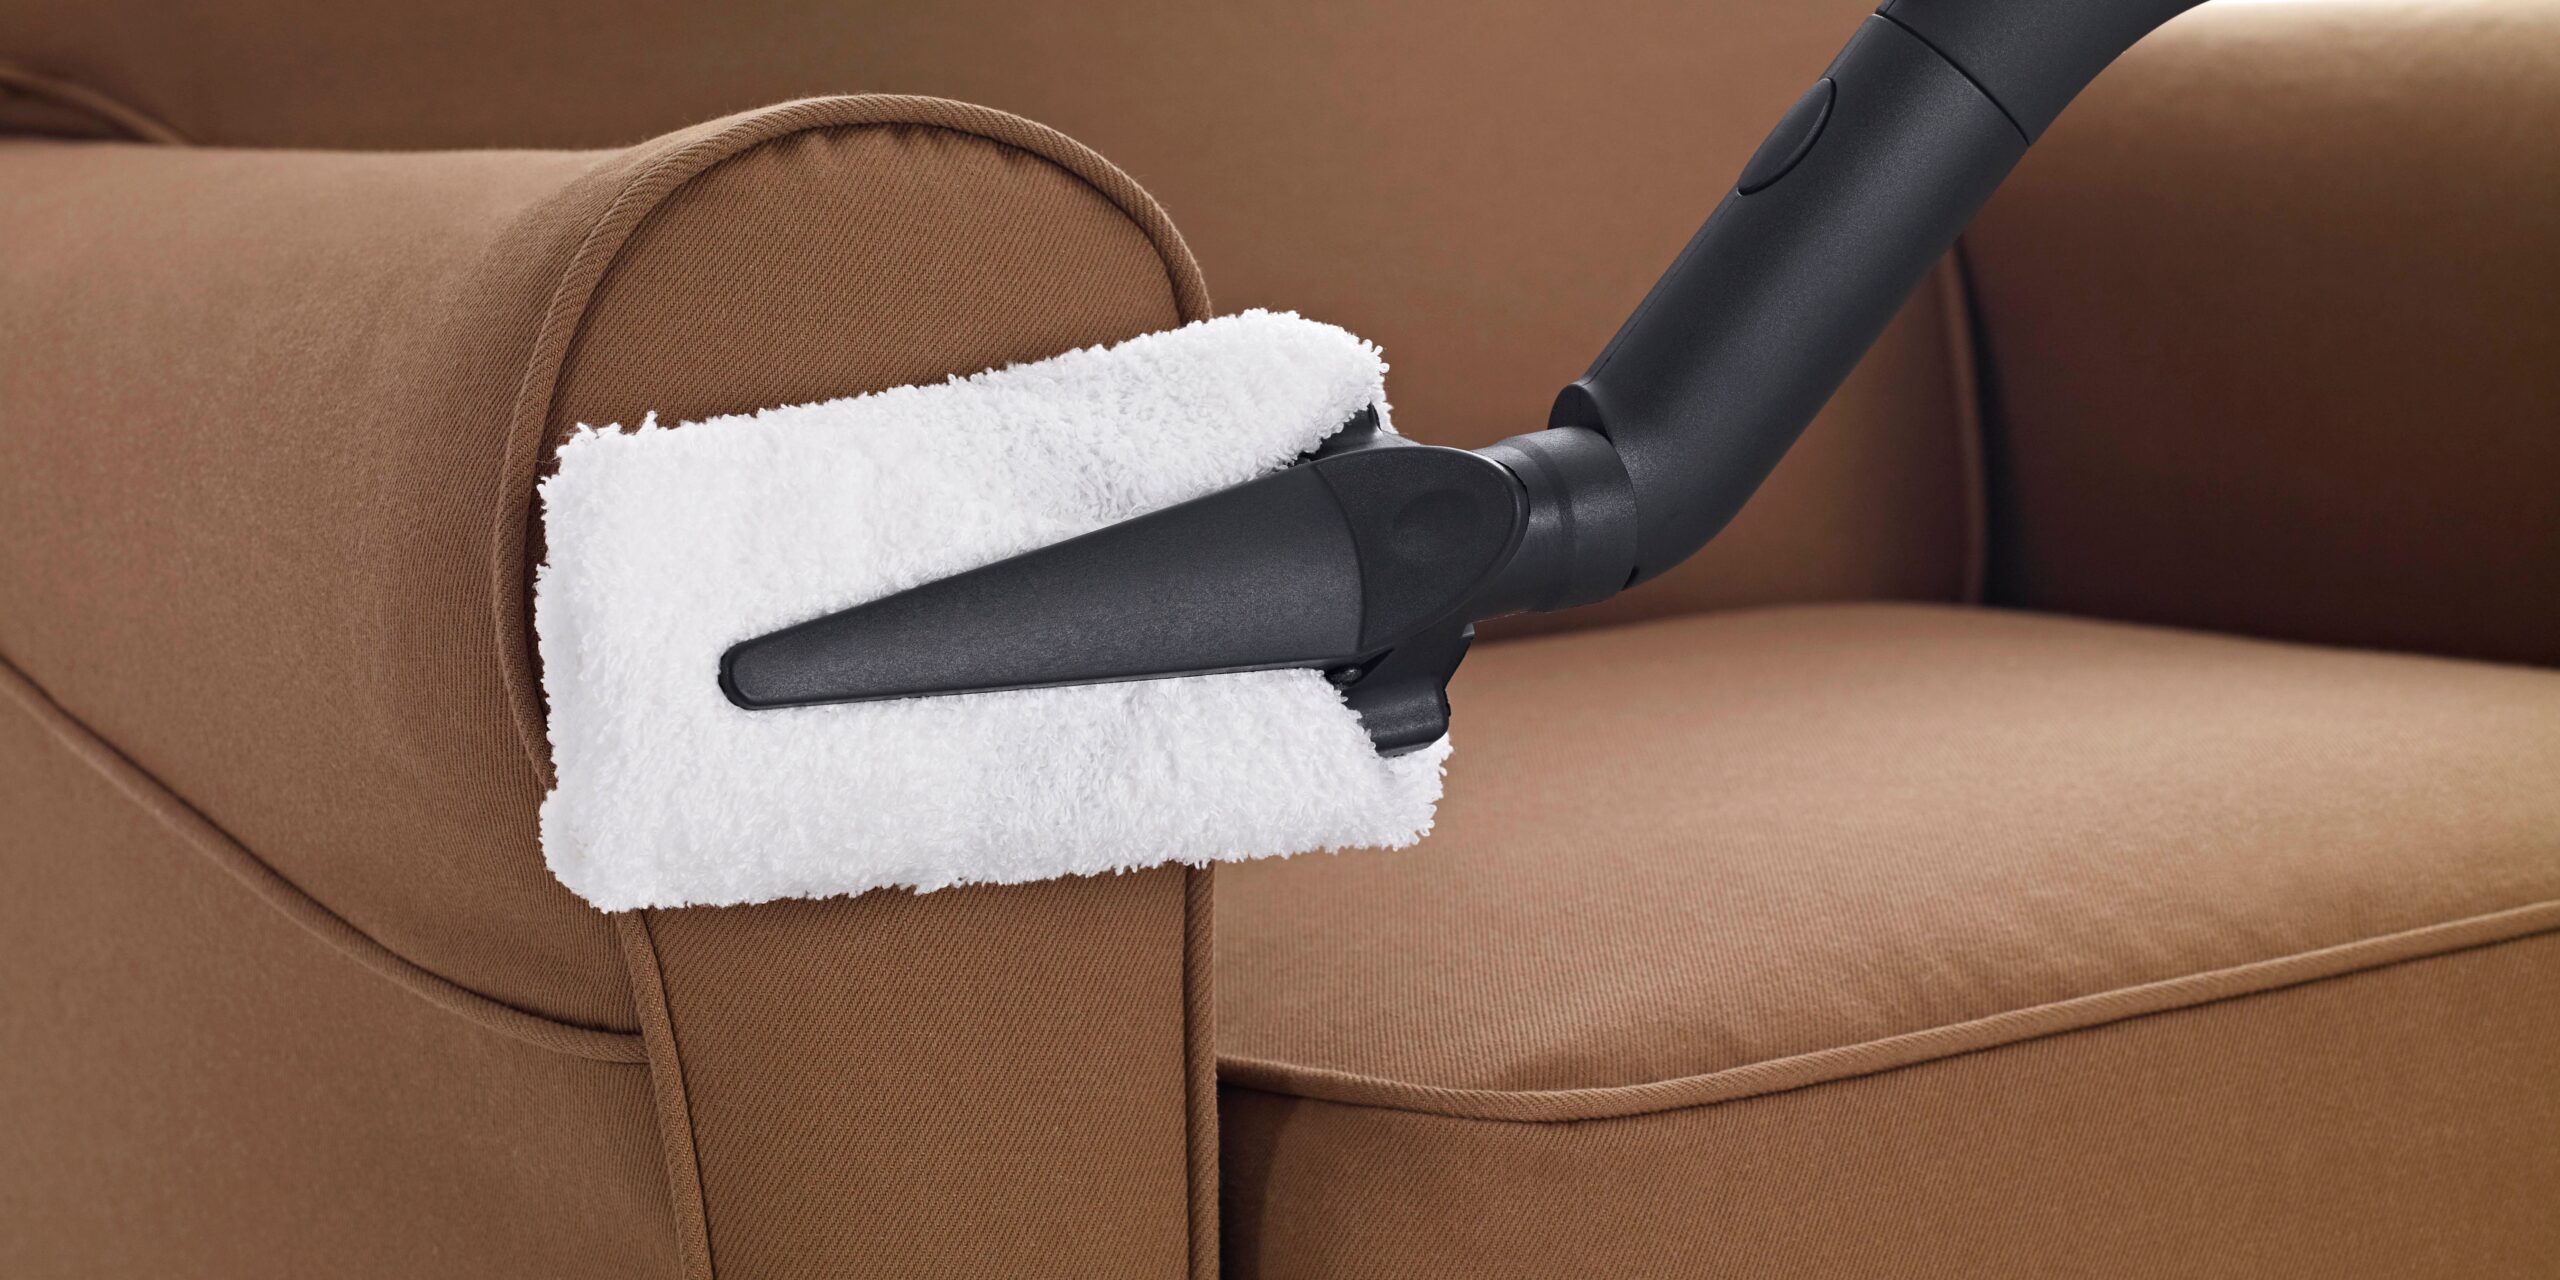 Best Steam Cleaners for Bed Bugs